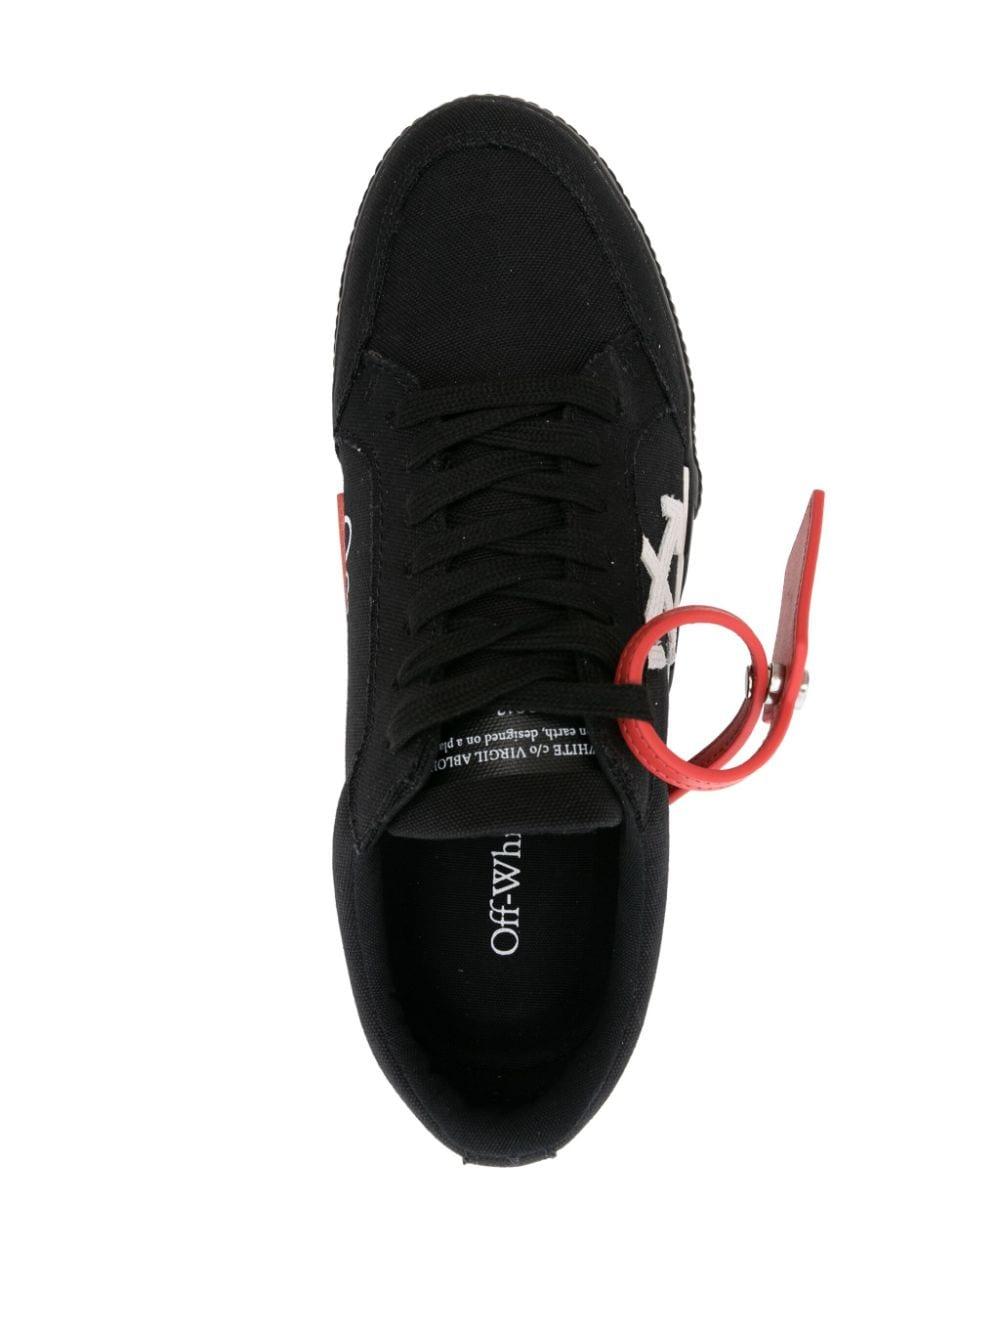 Off-White c/o Virgil Abloh Low Vulcanized Canvas Sneakers in Black